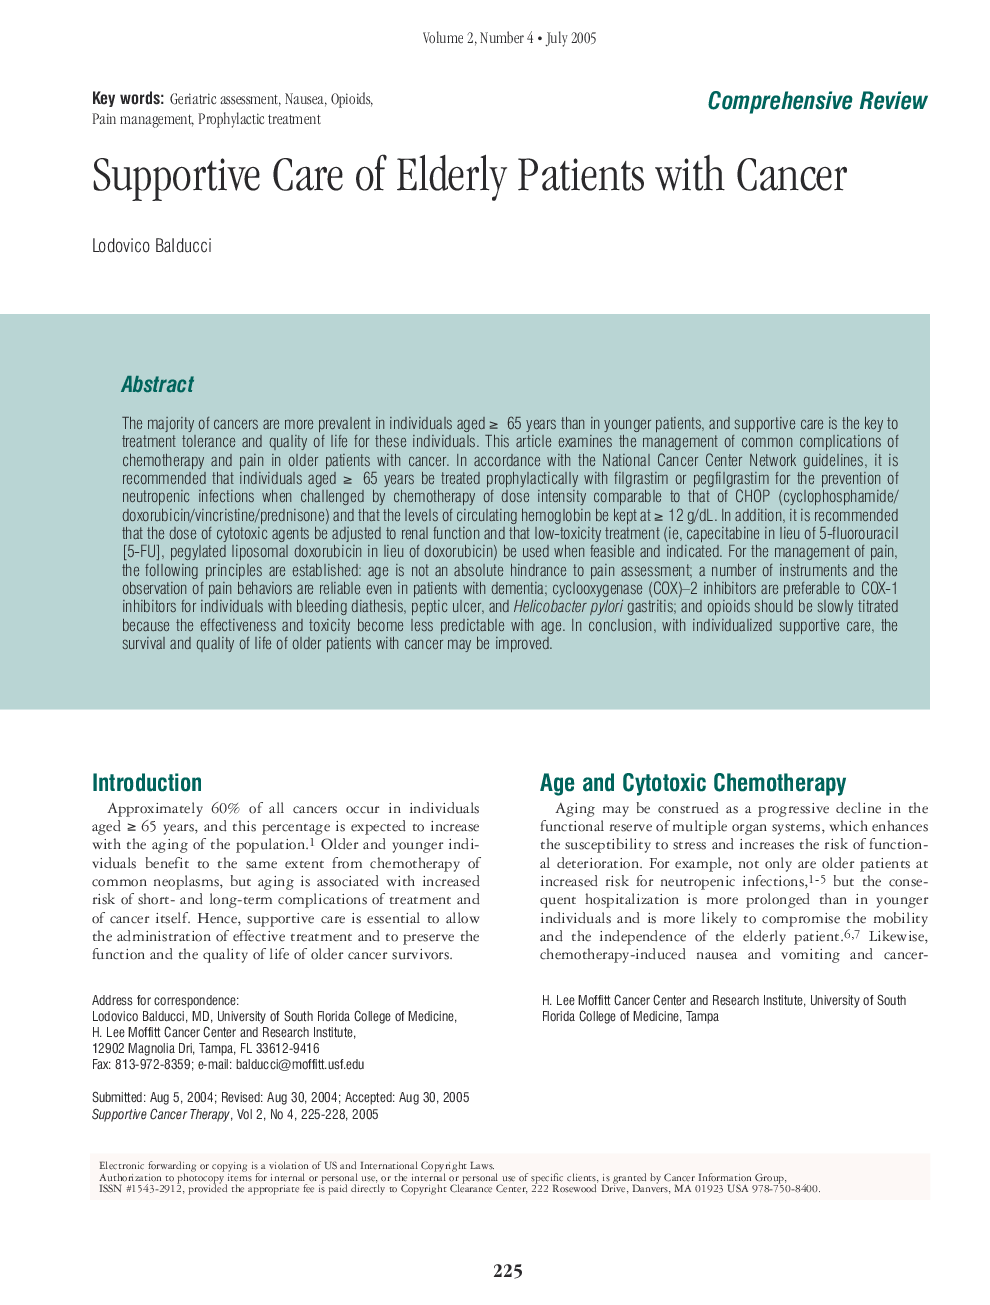 Supportive Care of Elderly Patients with Cancer